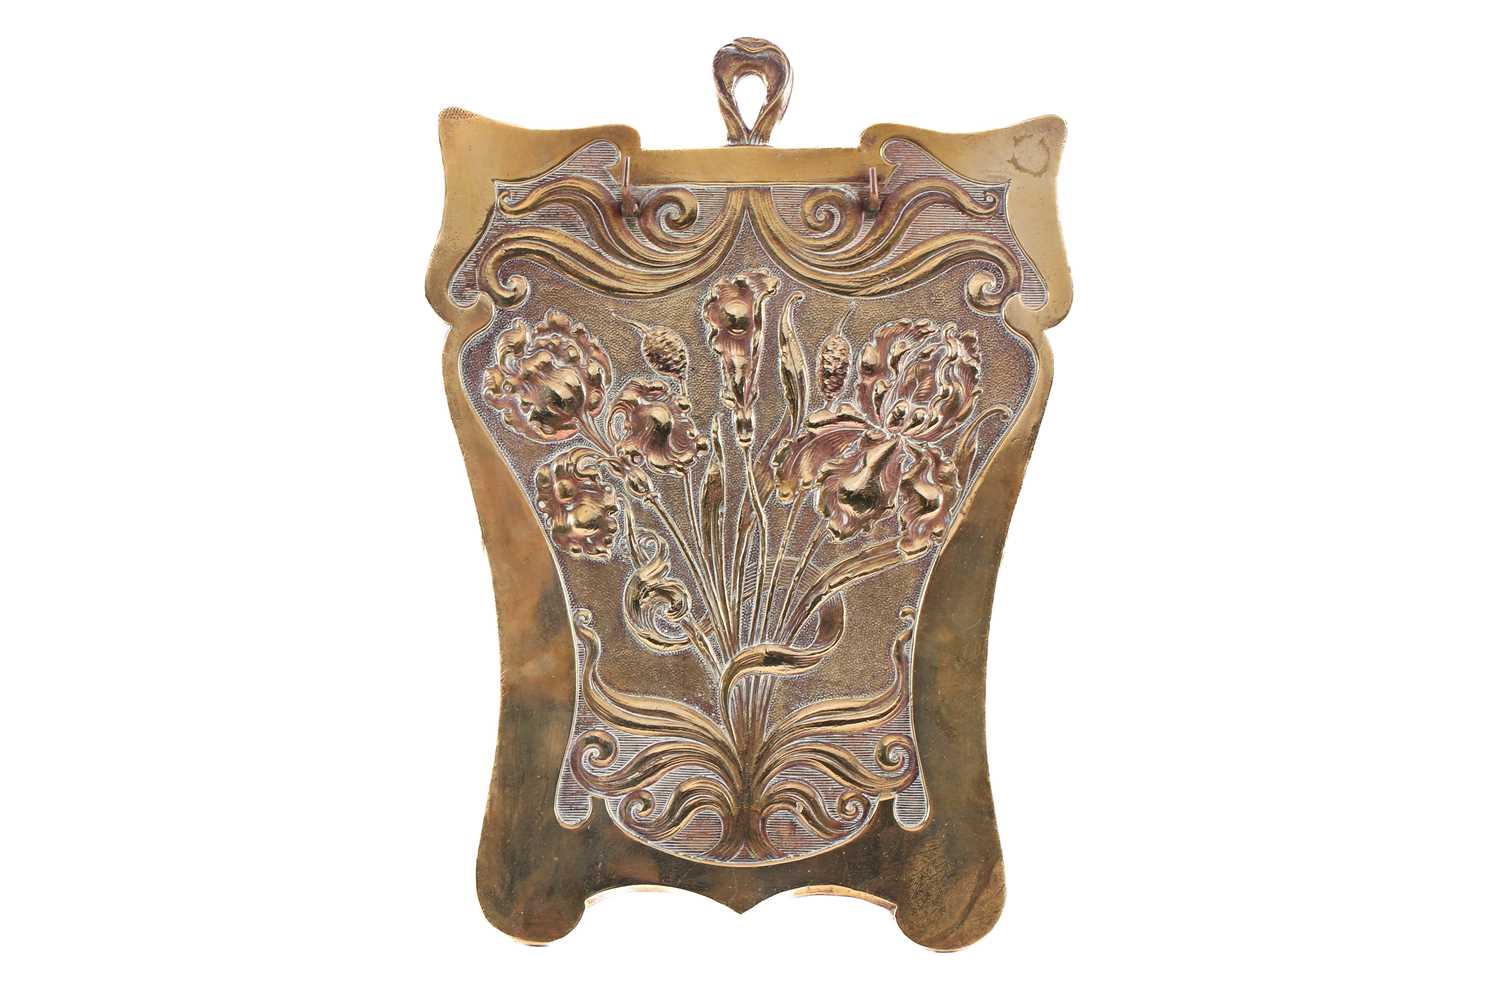 An early 20th century Art Nouveau brass and copper key holder/wall bracket, with embossed floral